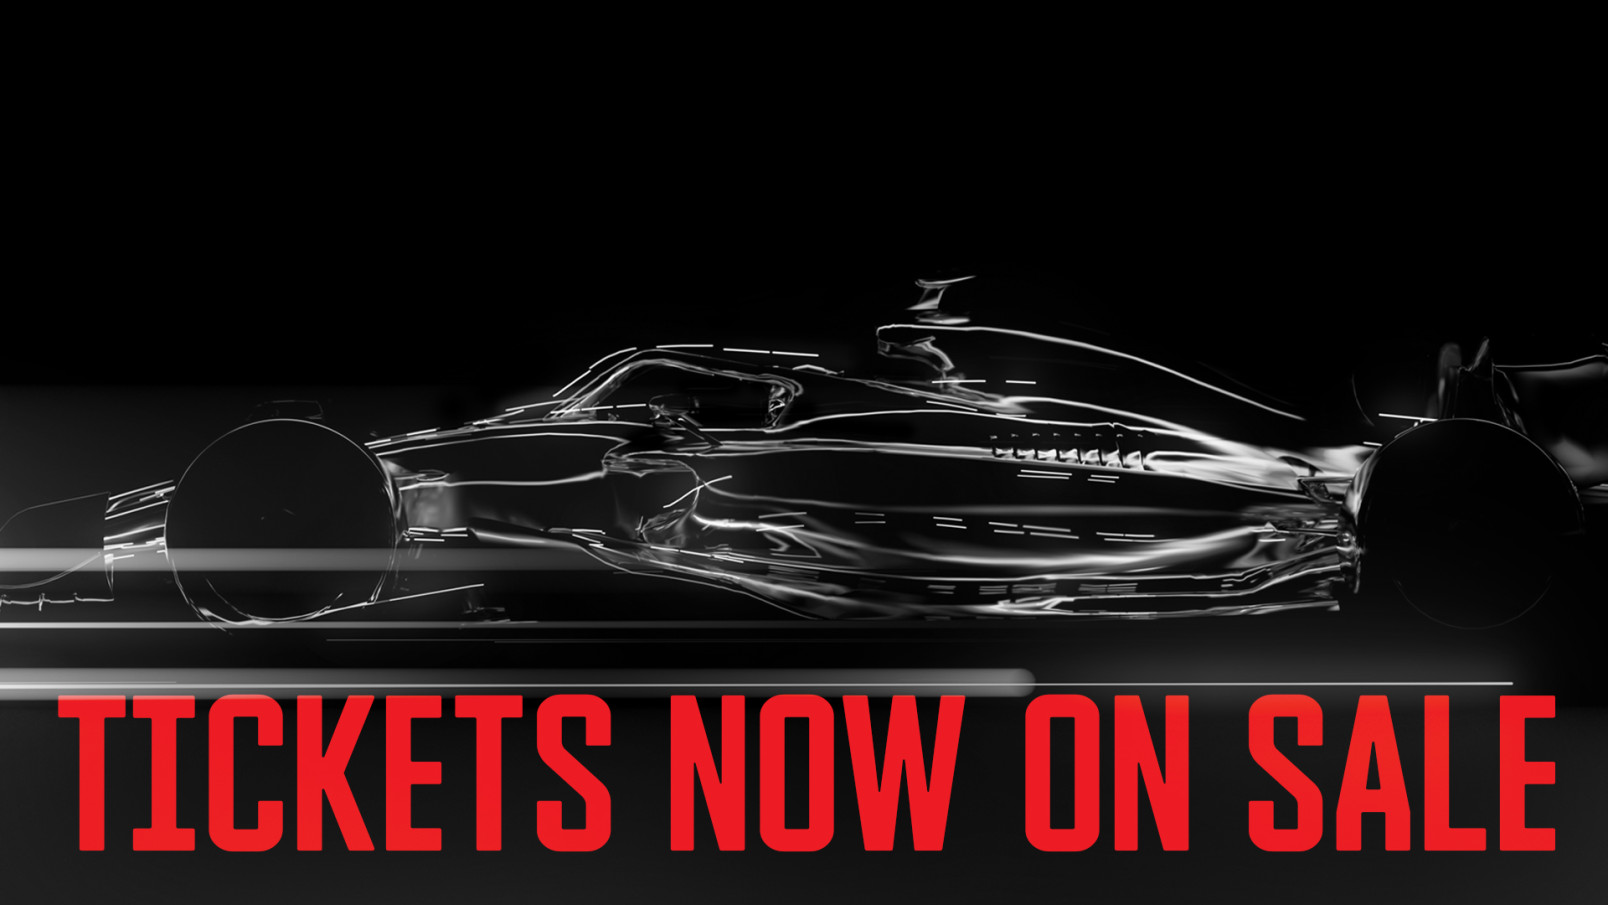 F1 Exhibition Promotional Image: Tickets Now On Sale